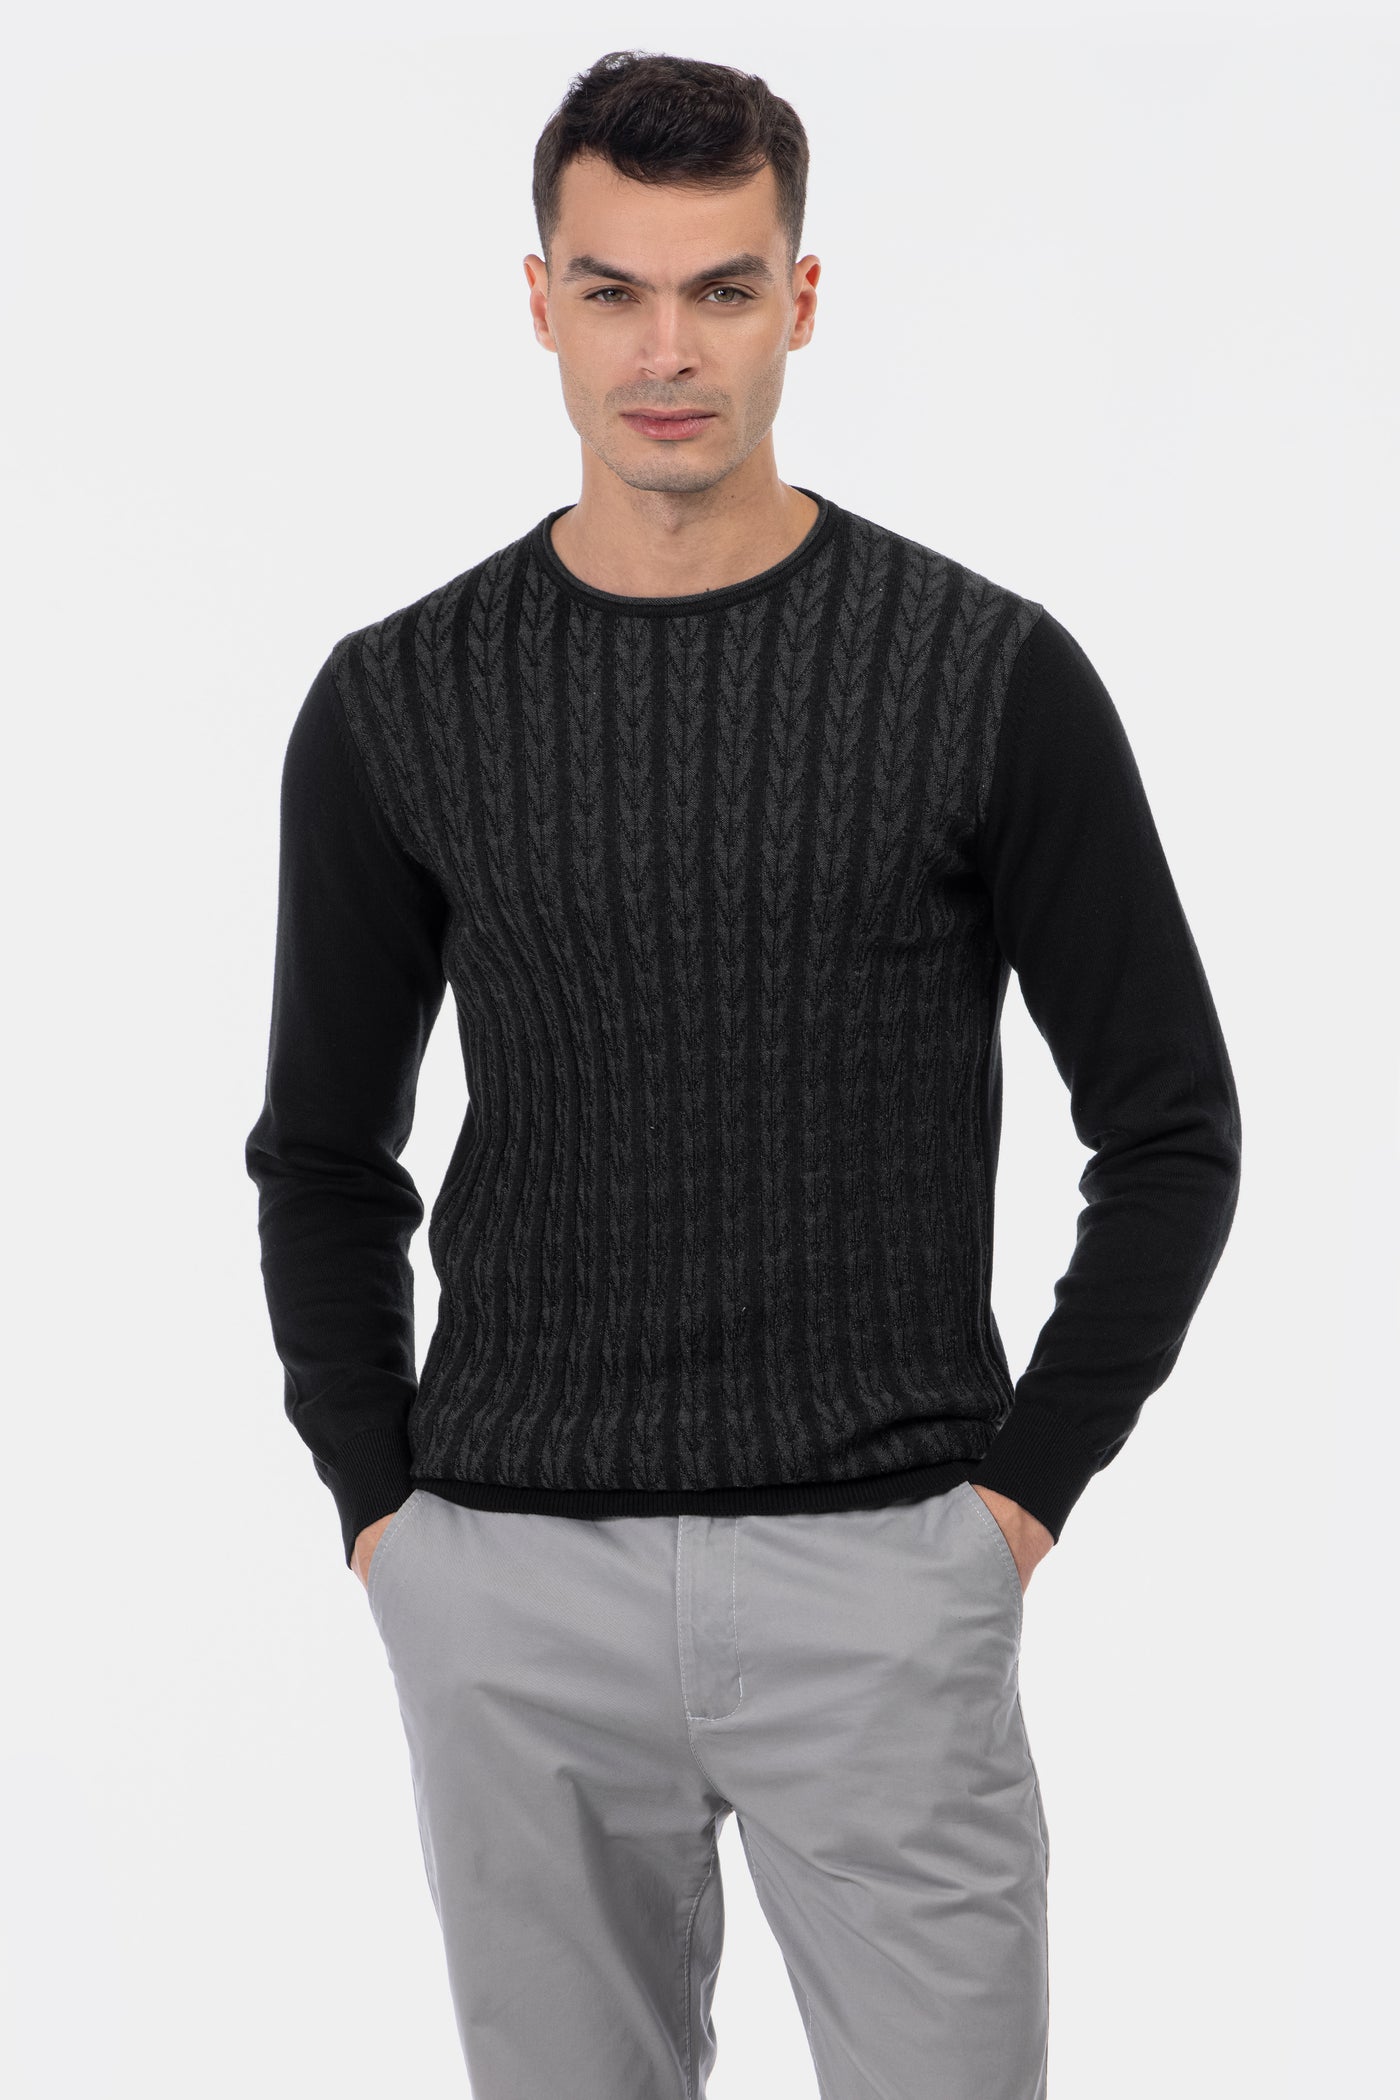 Jacquard Round Neck Black and Silver Knitted Pullover